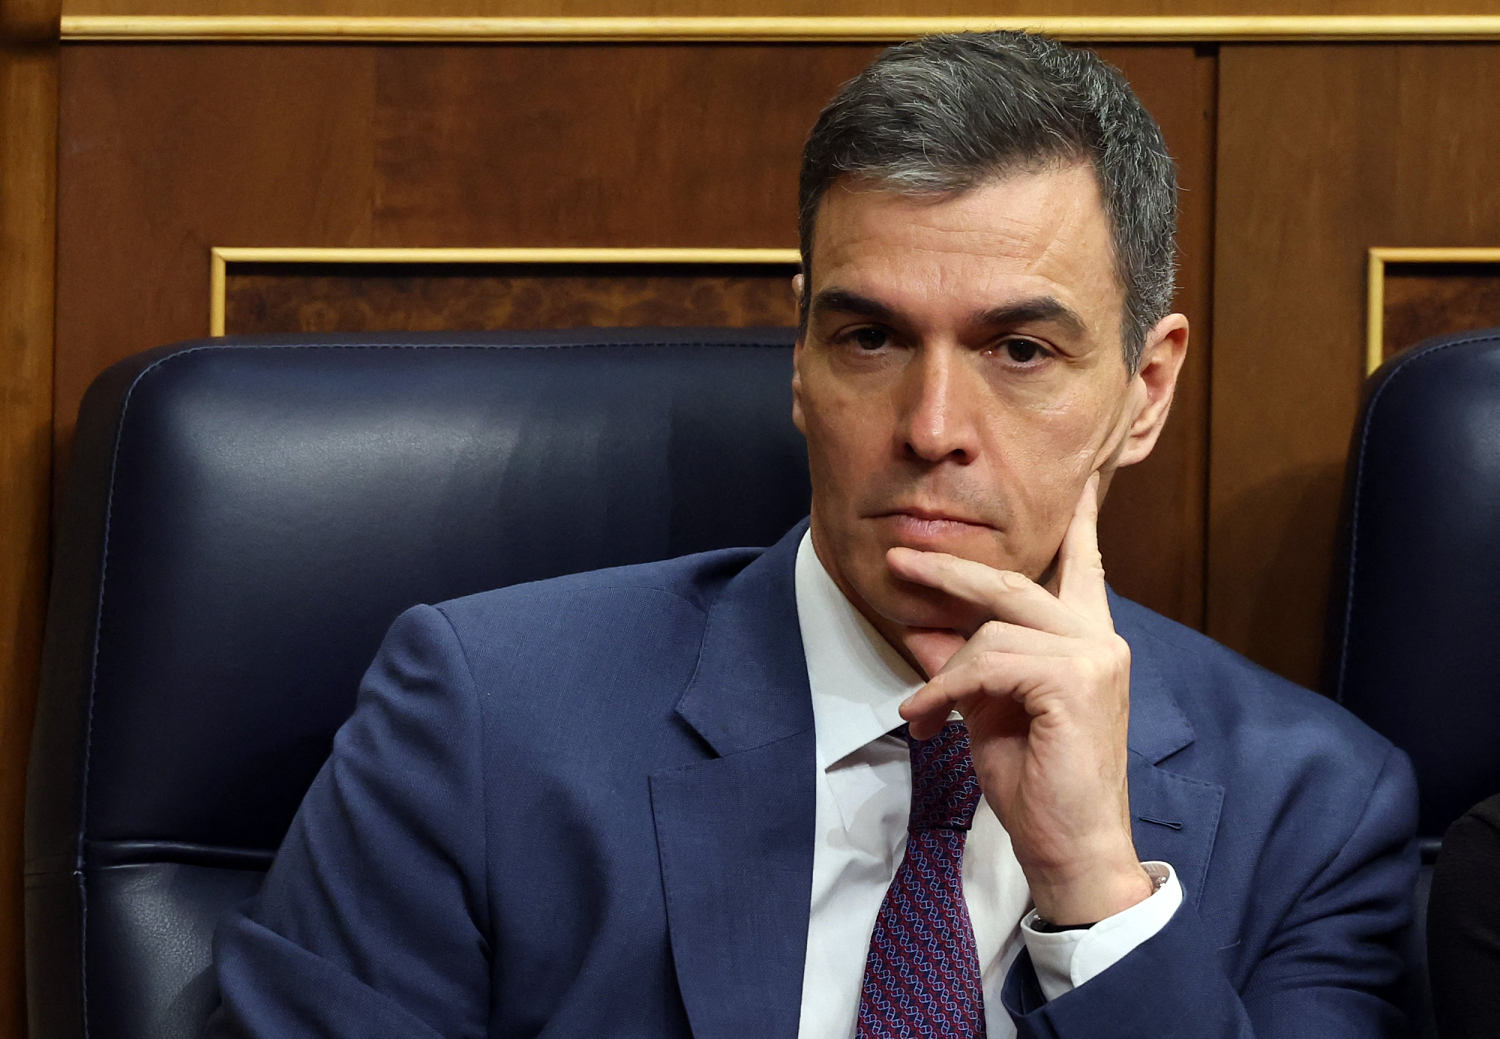 Spain’s PM suspends public duties to ‘reflect’ on future after wife is targeted by judicial probe